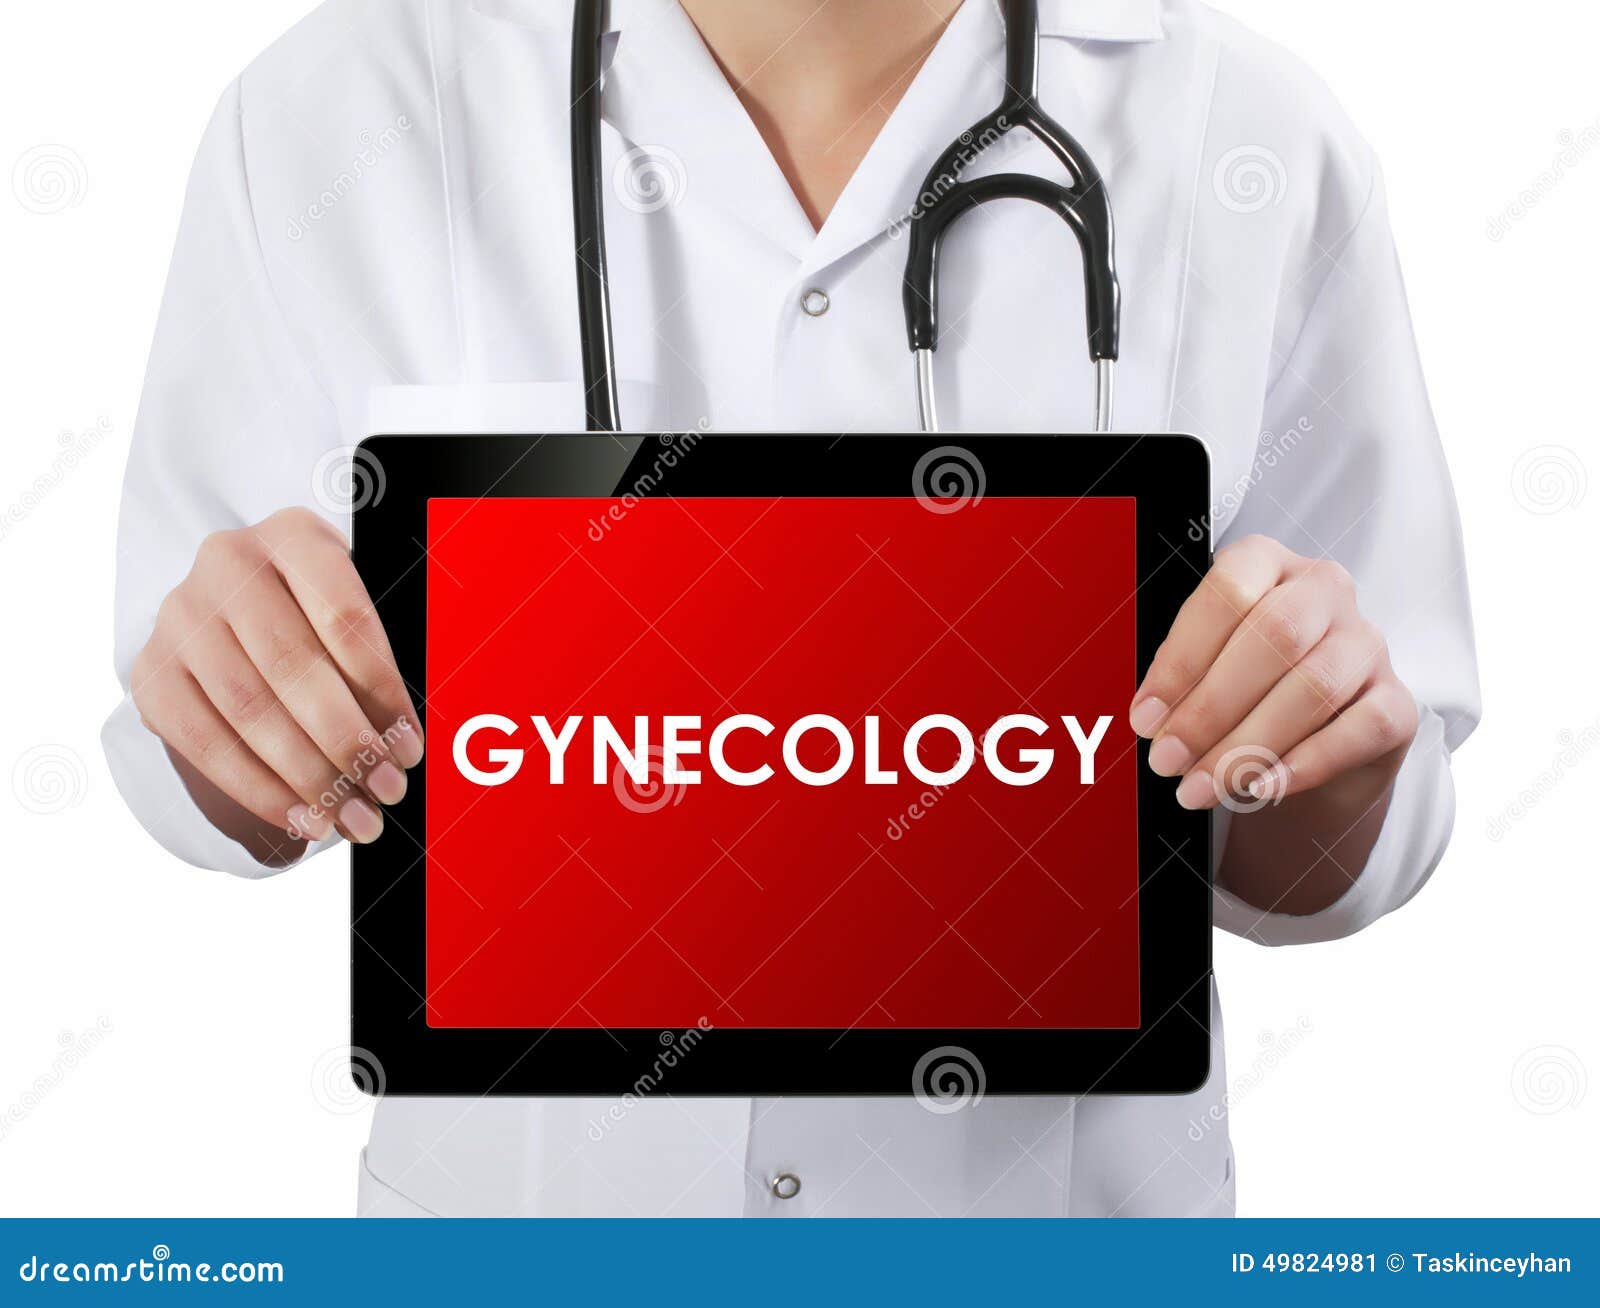 doctor showing tablet with gynecology text.